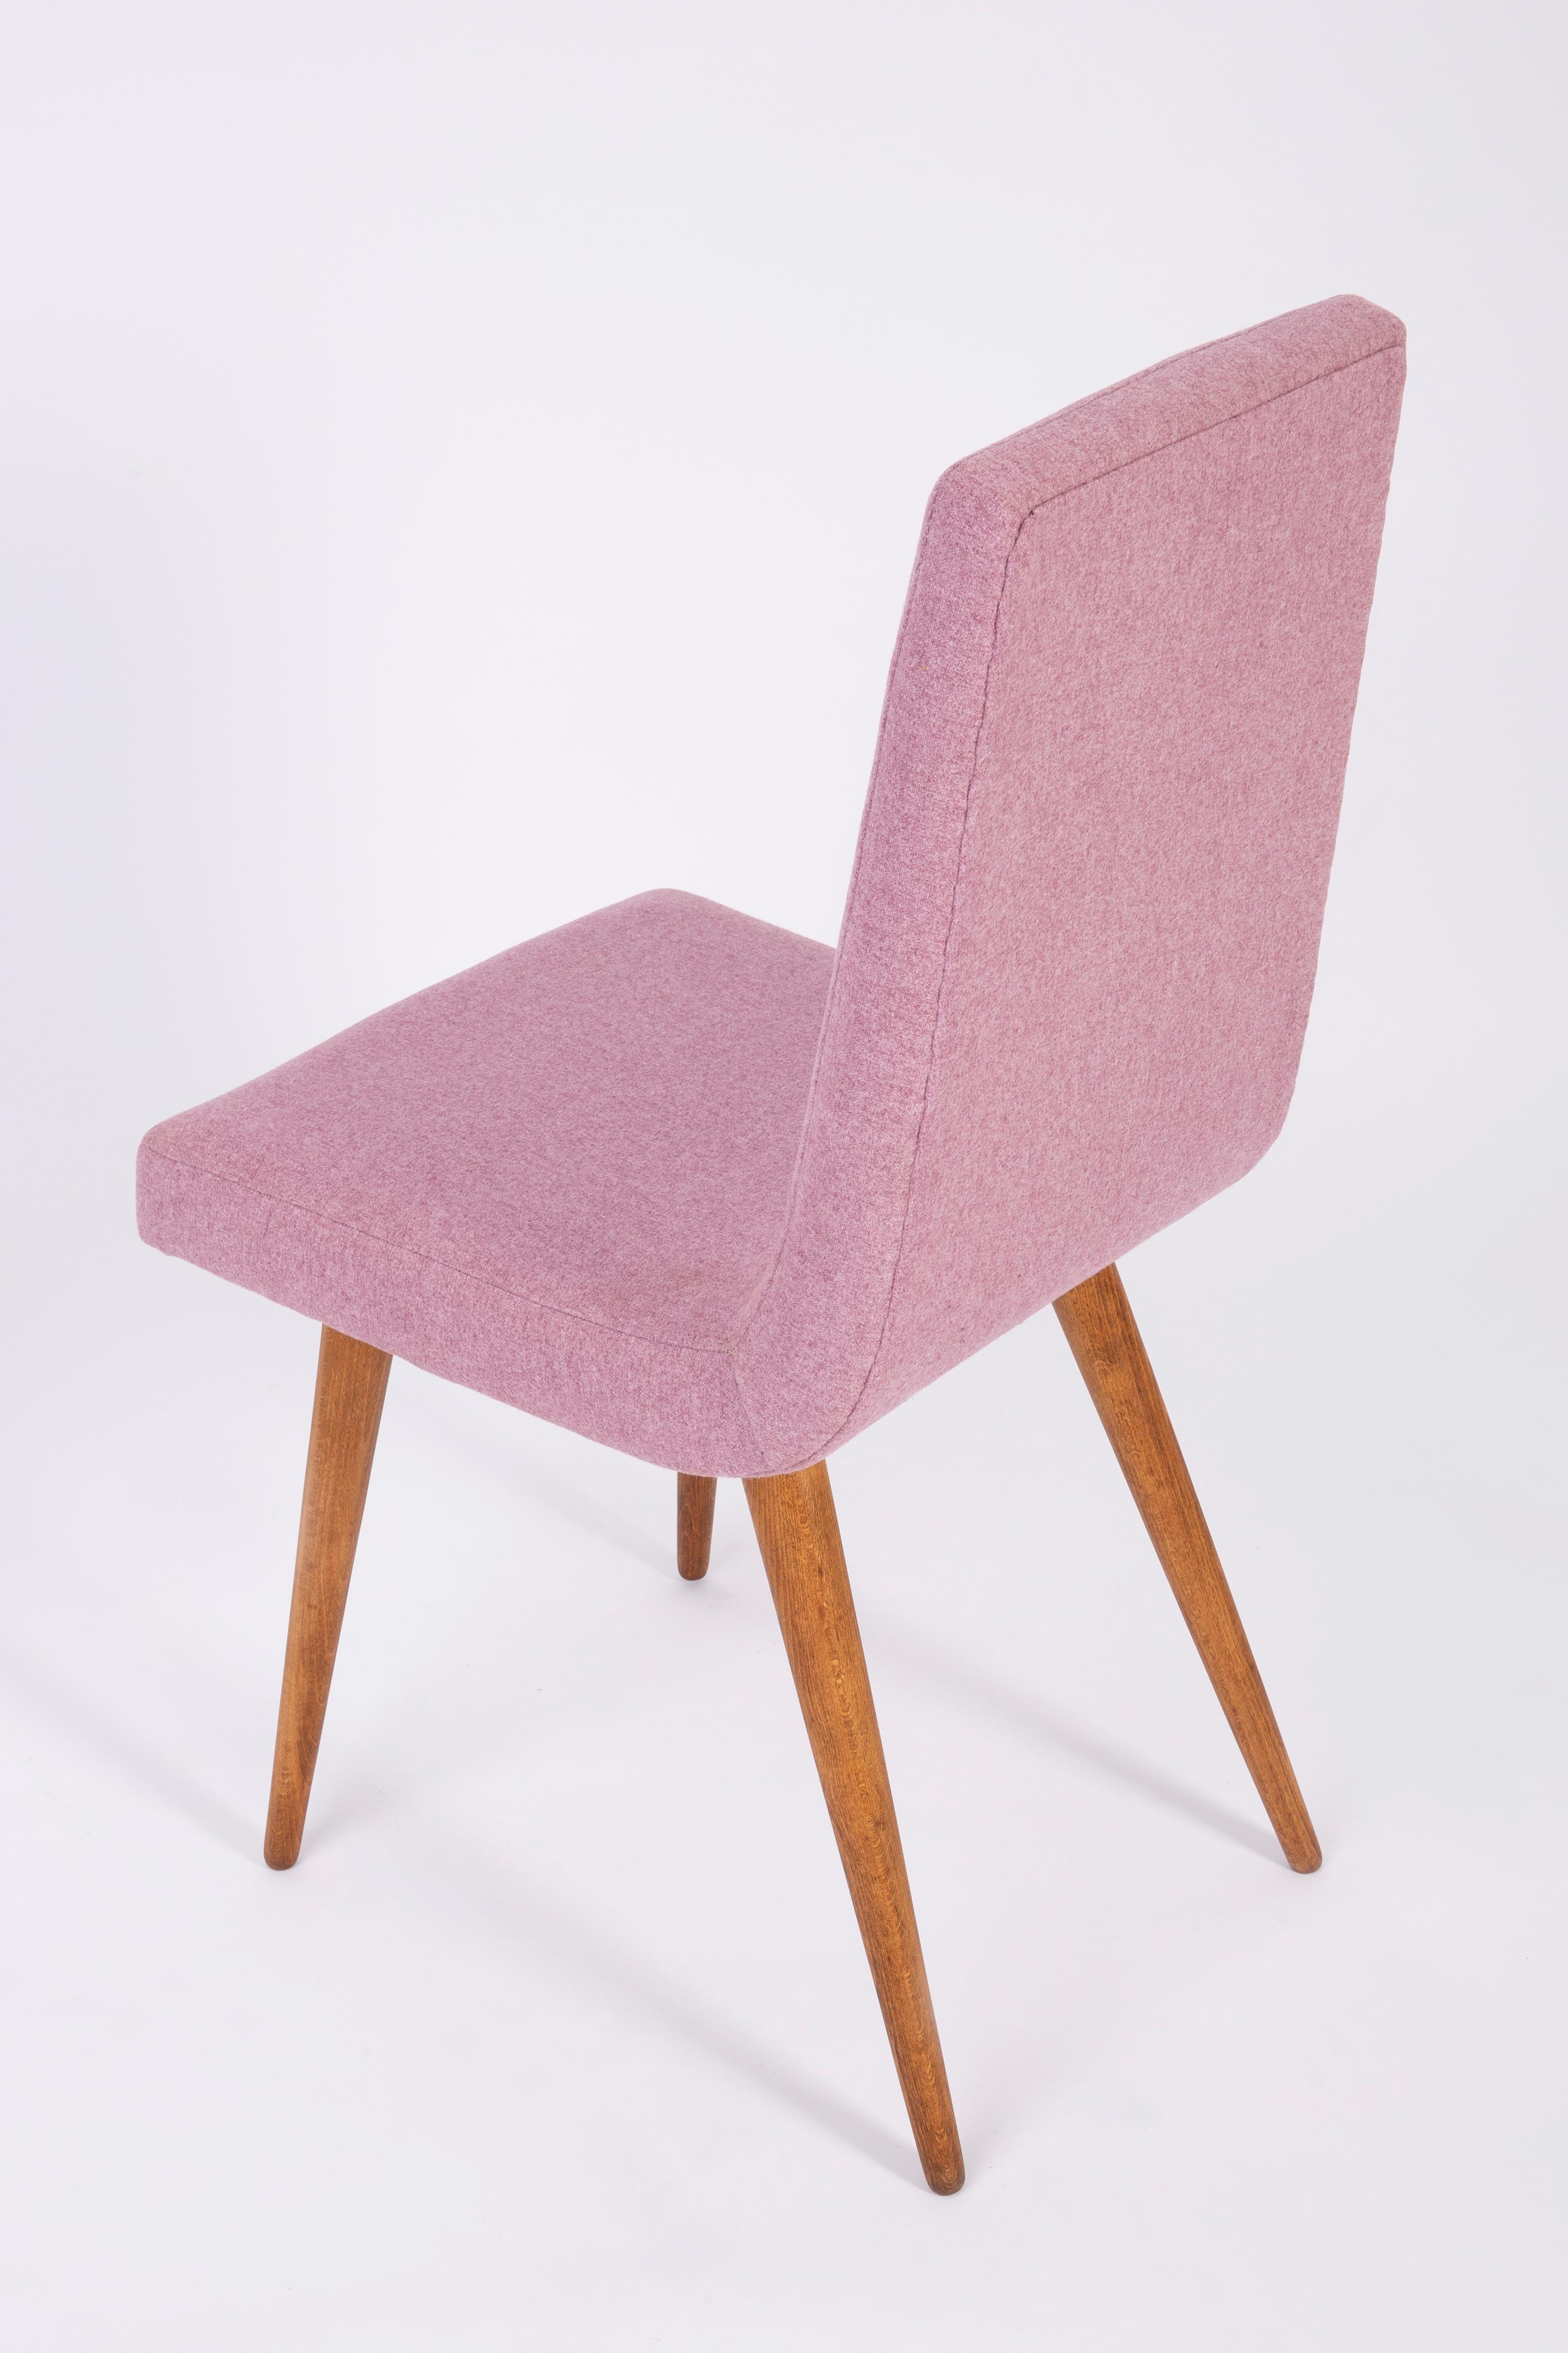 Set of Four Mid-Century Vintage Pink Melange Chairs, Europe, 1960s For Sale 1